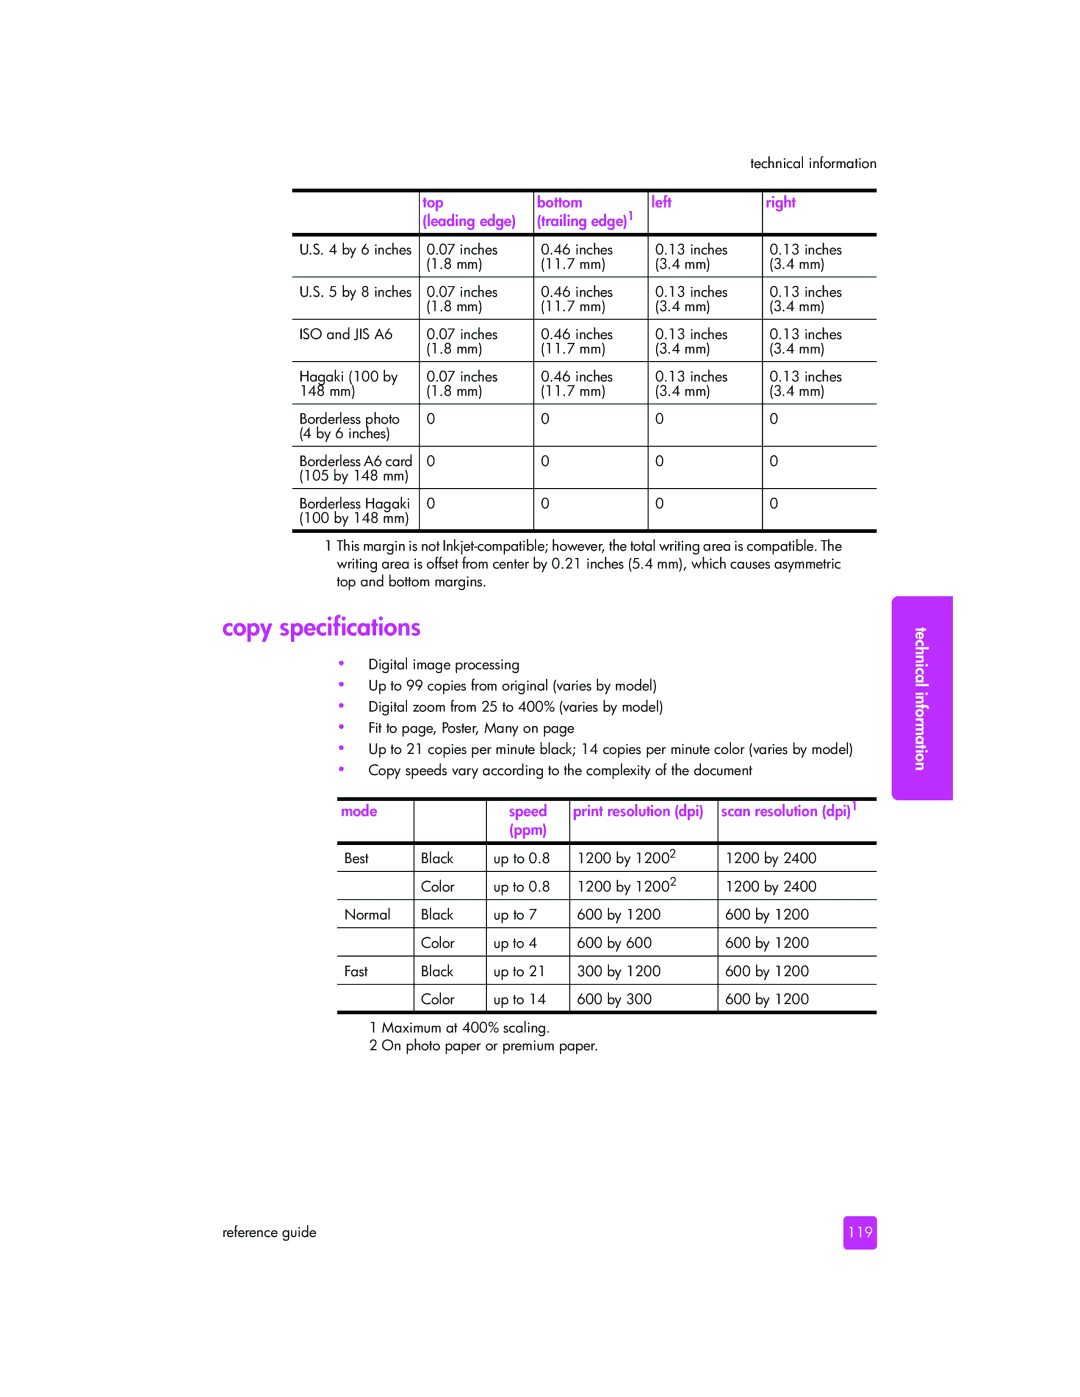 HP 2510xi manual Copy specifications, 119 